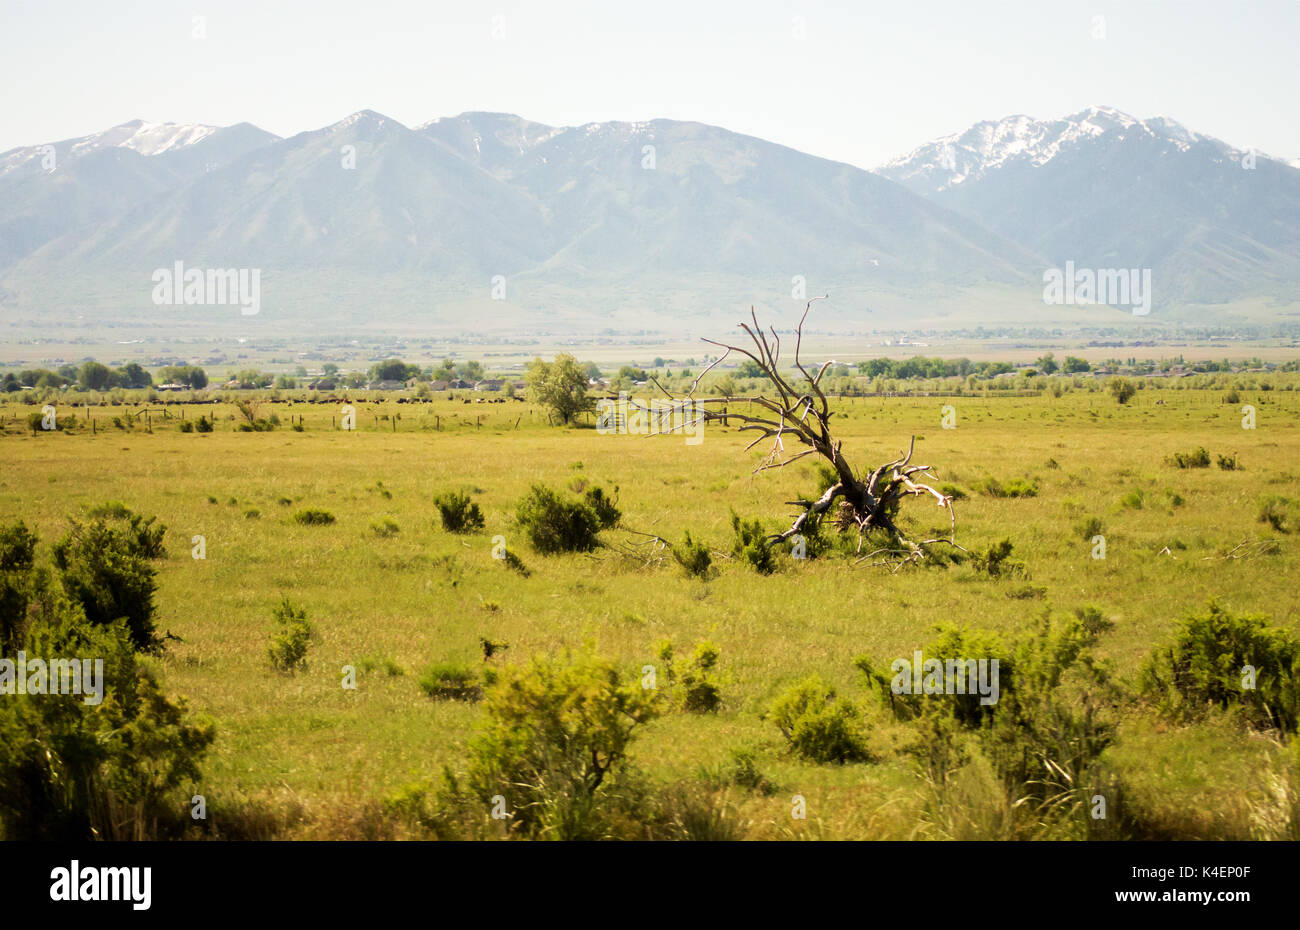 A dead tree in the middle of a field with mountains behind it. Stock Photo